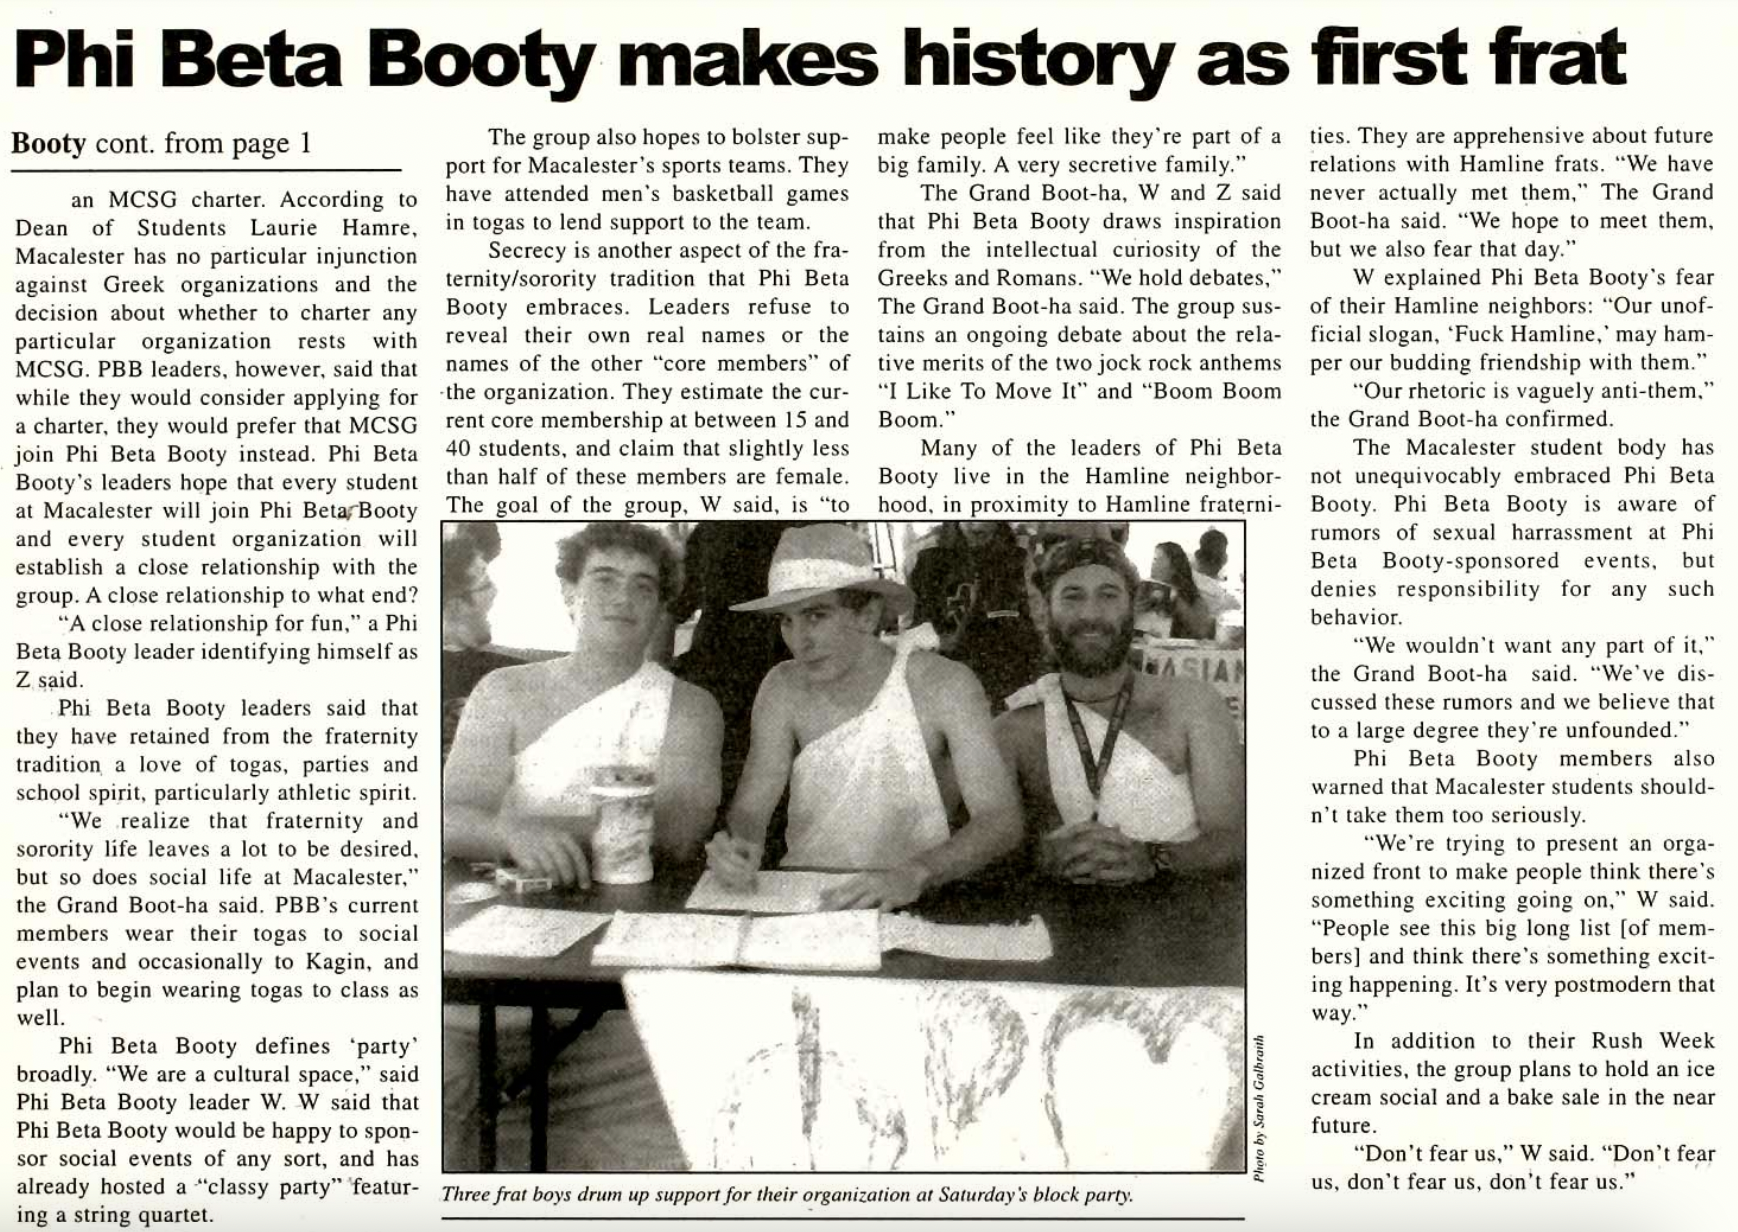 The Mac Weekly, September 15, 2000. Mac Frat Open to All.